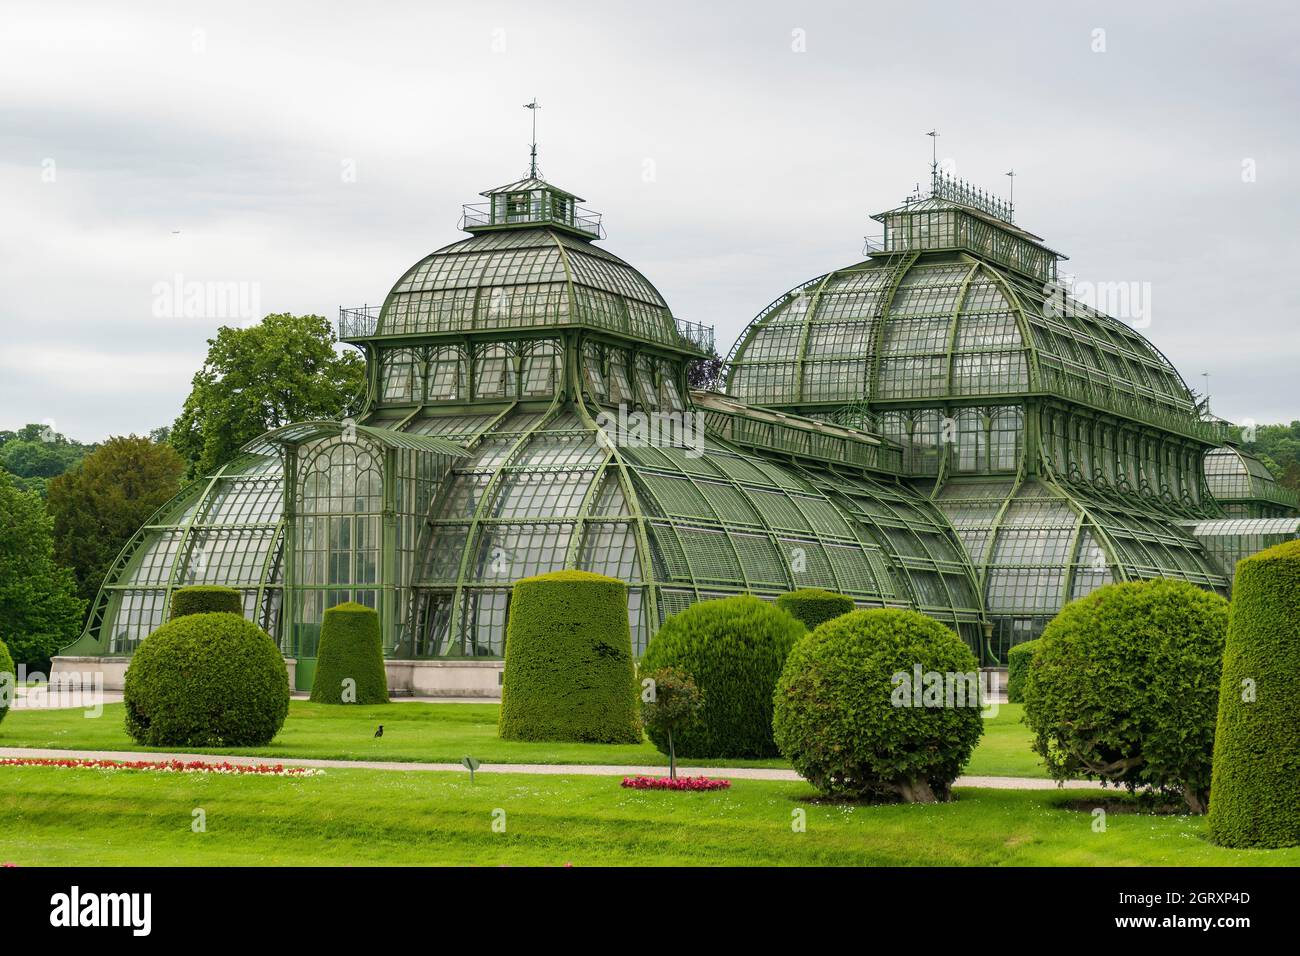 31 May 2019 Vienna, Austria - Palmenhaus building at Schonbrunn gardens. (Palm house) Constructed of iron and glass. Tidy lawns and cloudy day Stock Photo